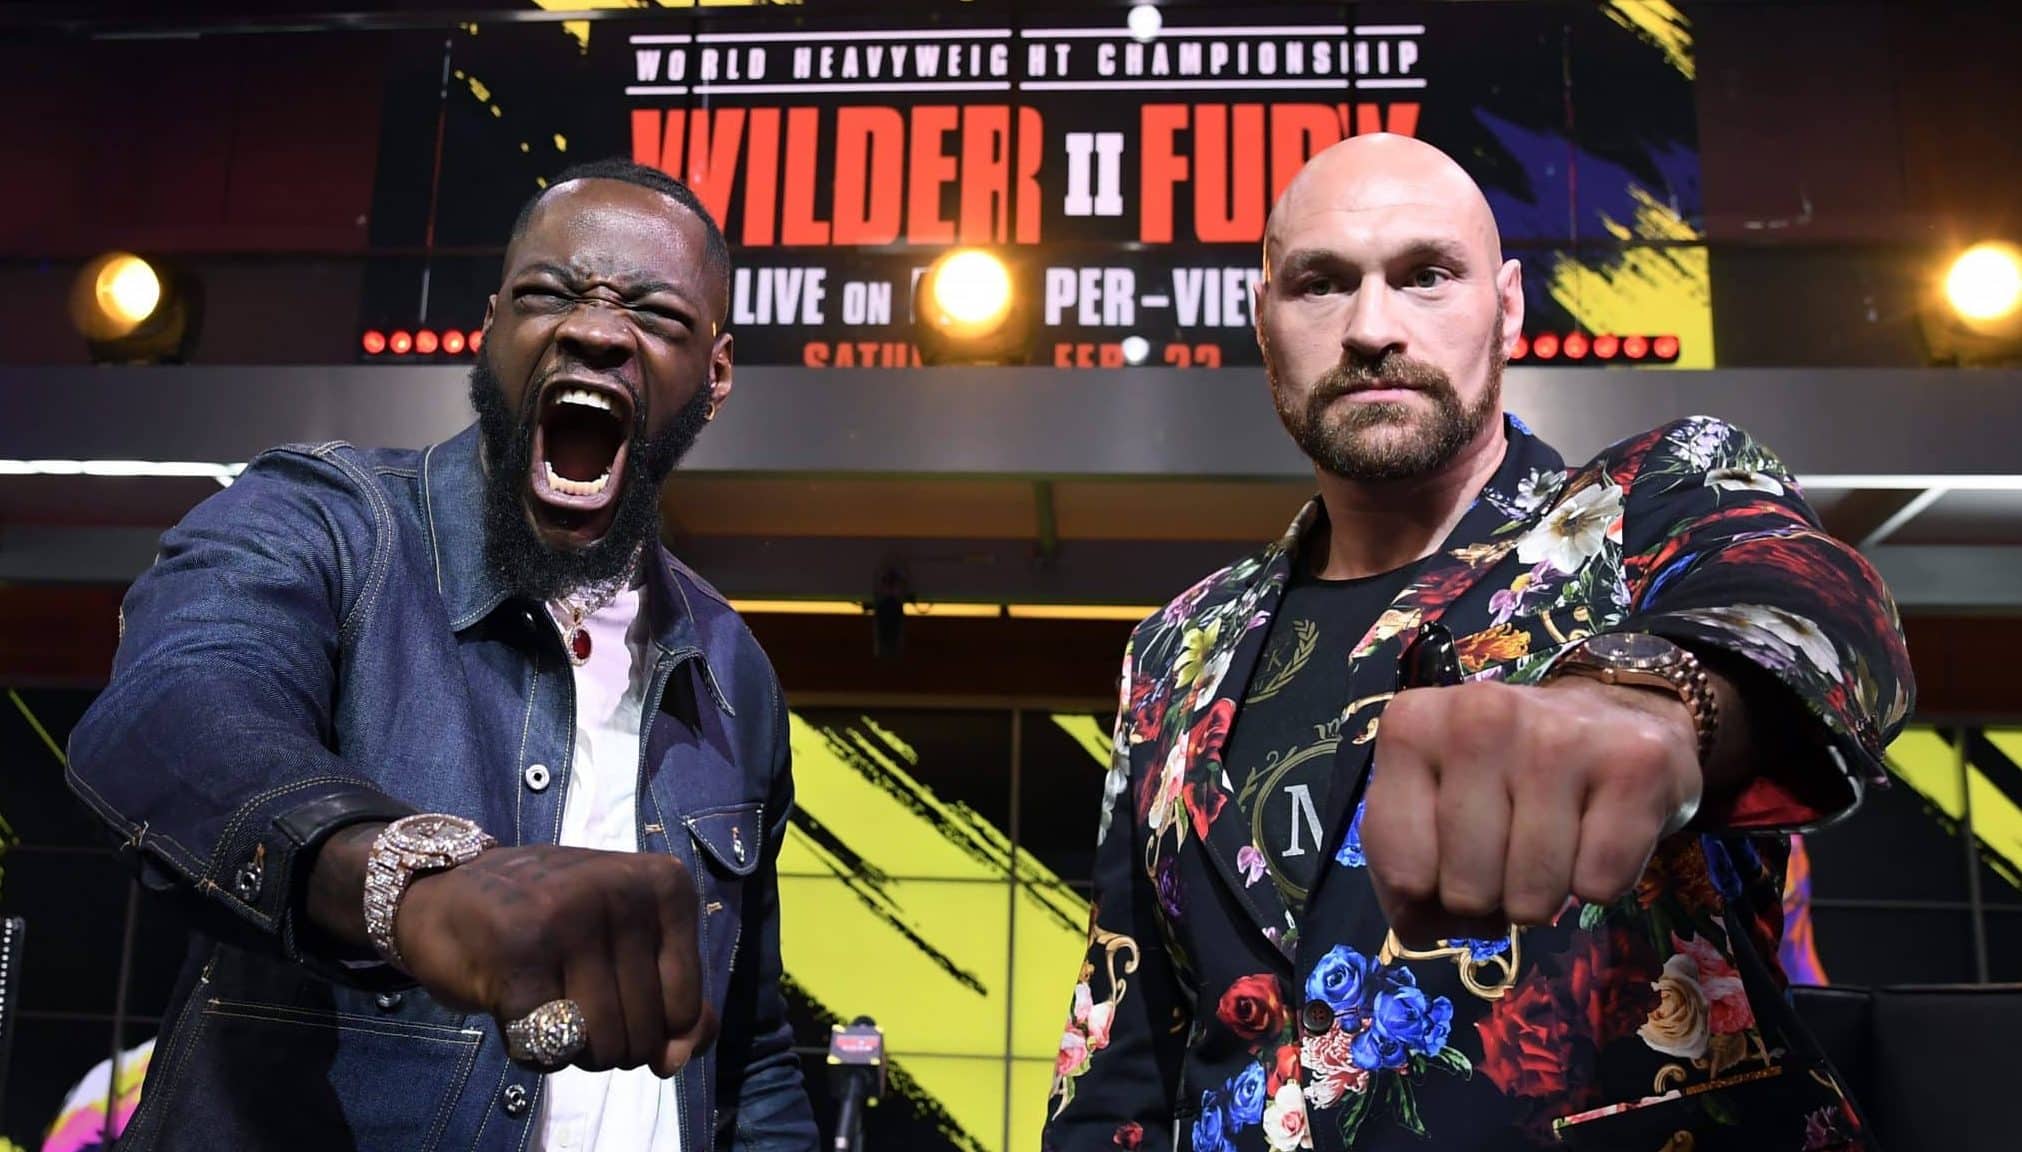 LOS ANGELES, CA - JANUARY 25: Deontay Wilder (L) and Tyson Fury face off during a news conference at Fox Studios on January 25, 2020 in Los Angeles, California.